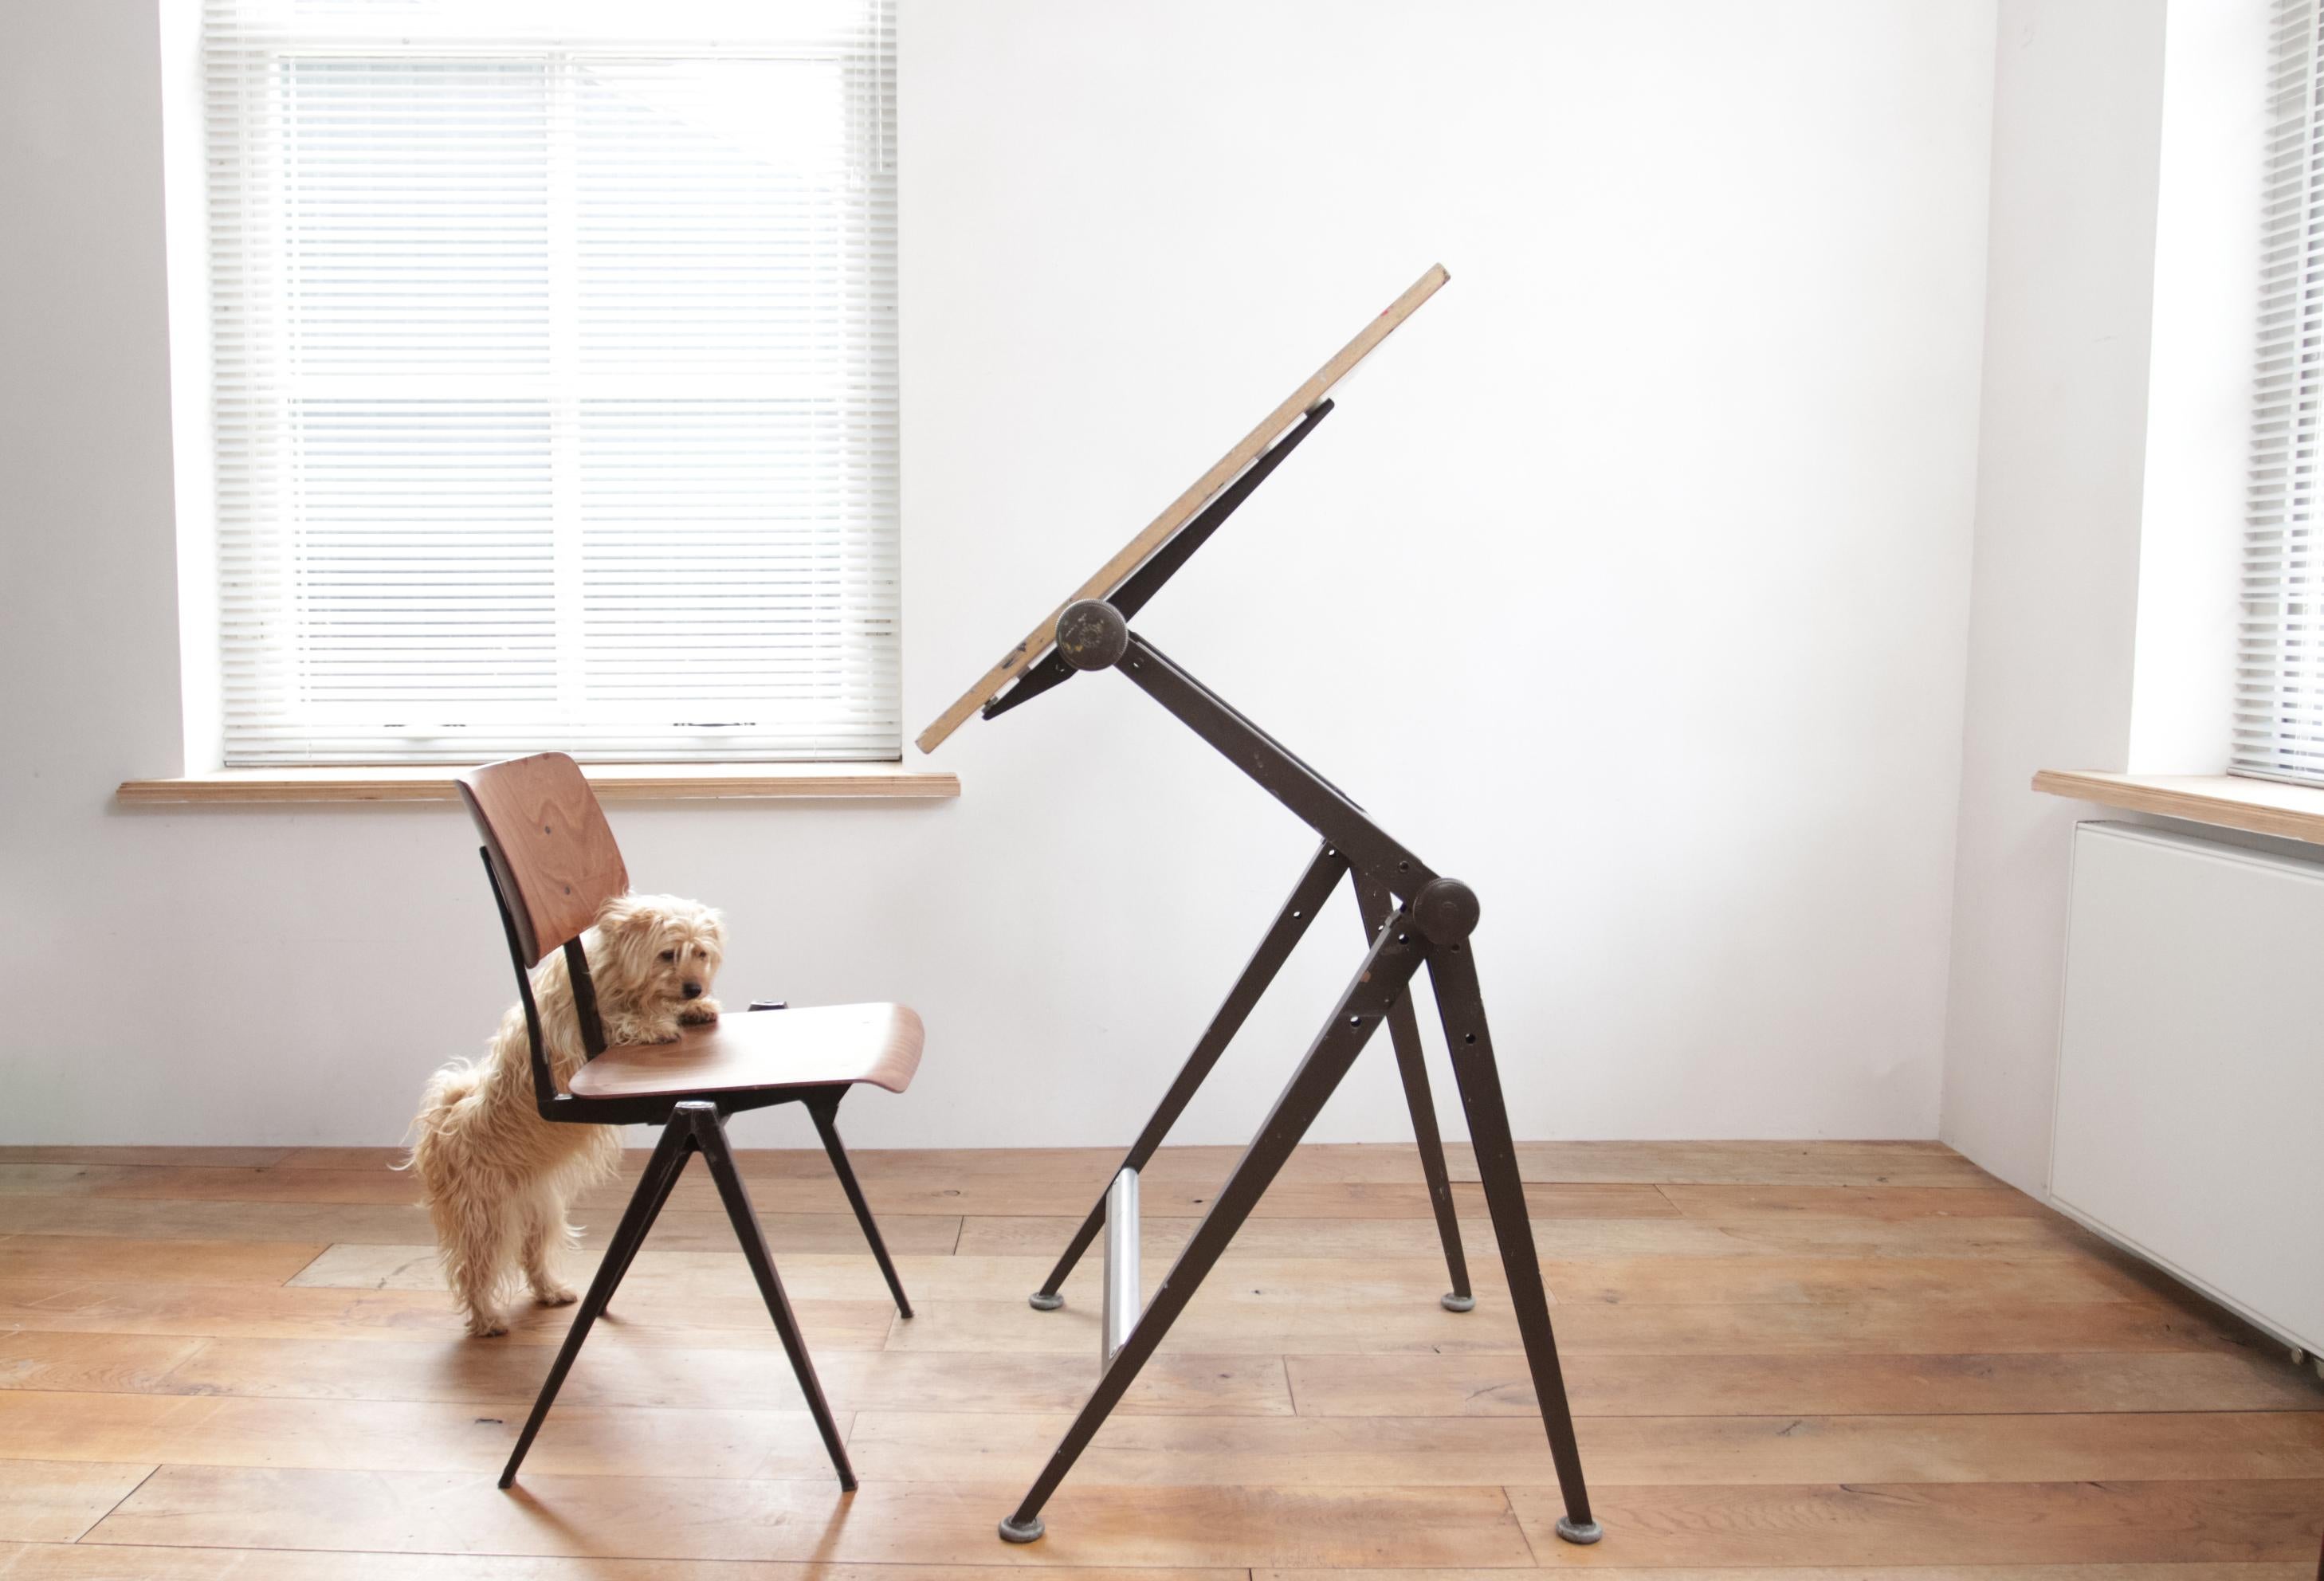 Reply Dutch Design Architect drawing table designed by Wim Rietveld and Friso Kramer for Ahrend de Circel in 1959.
Design Classic, awarded with the 